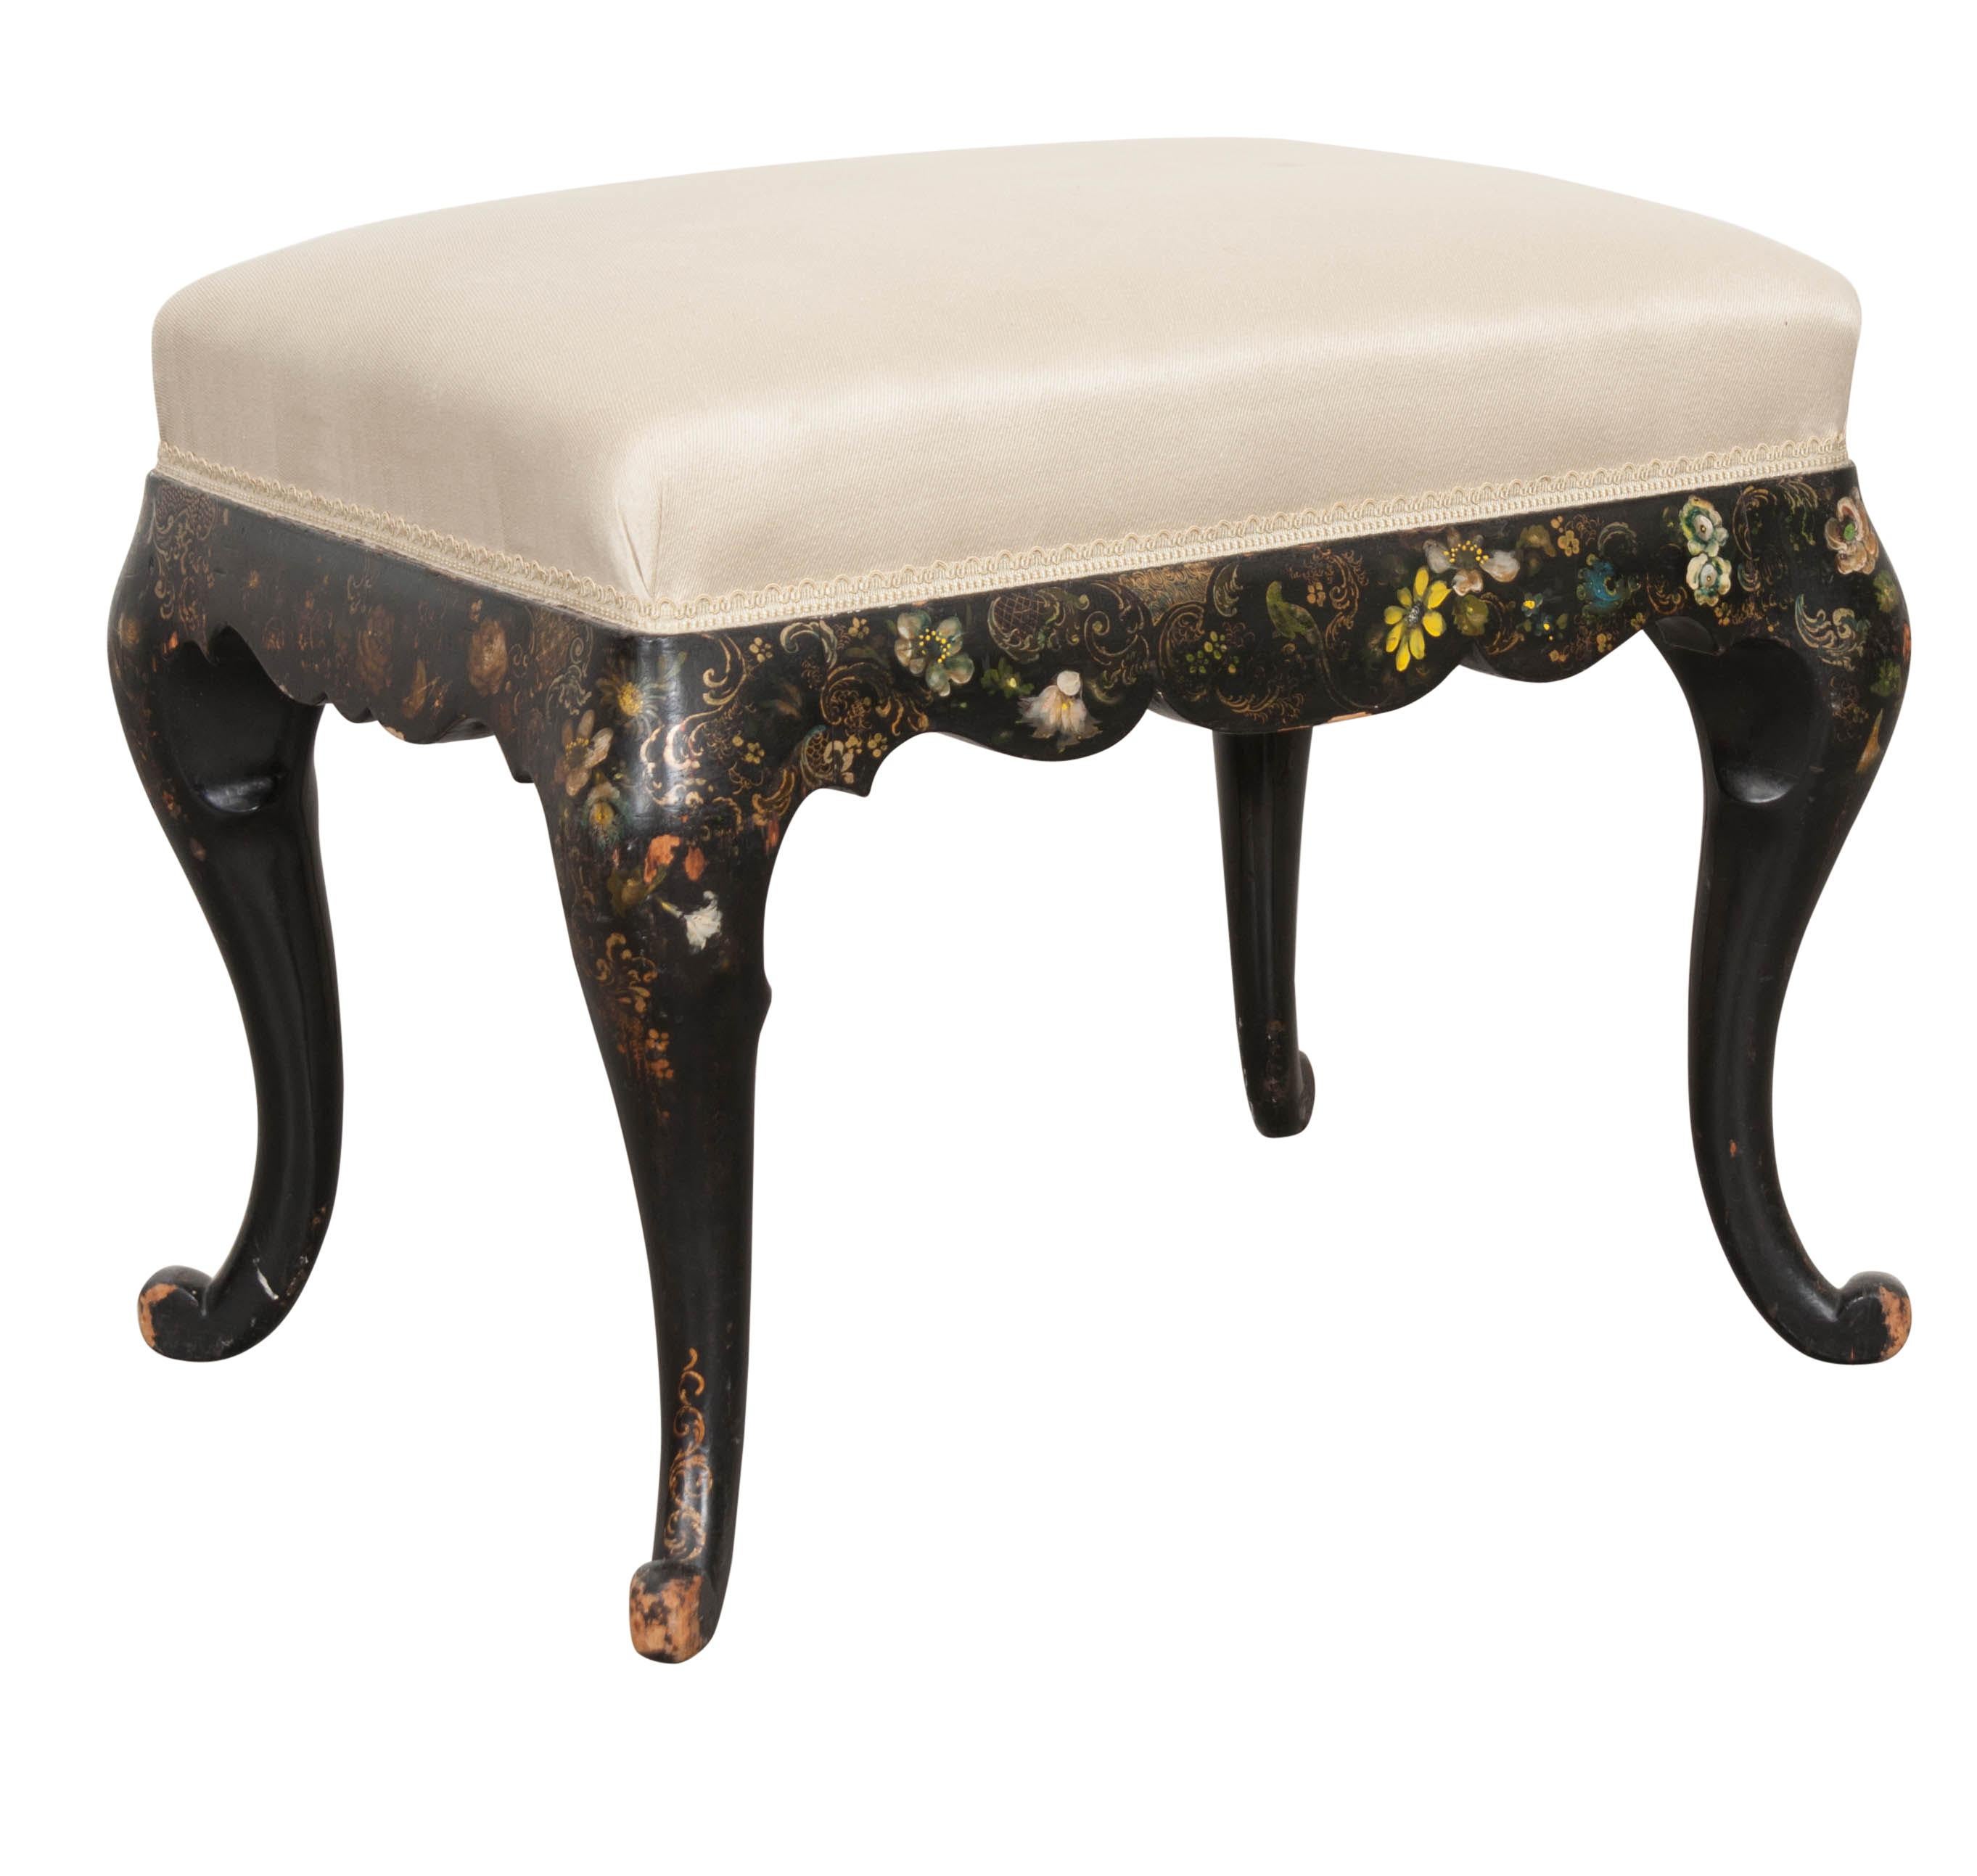 Early-20th Century English Chinoiserie Hand-Painted and Cabriole Leg Stool